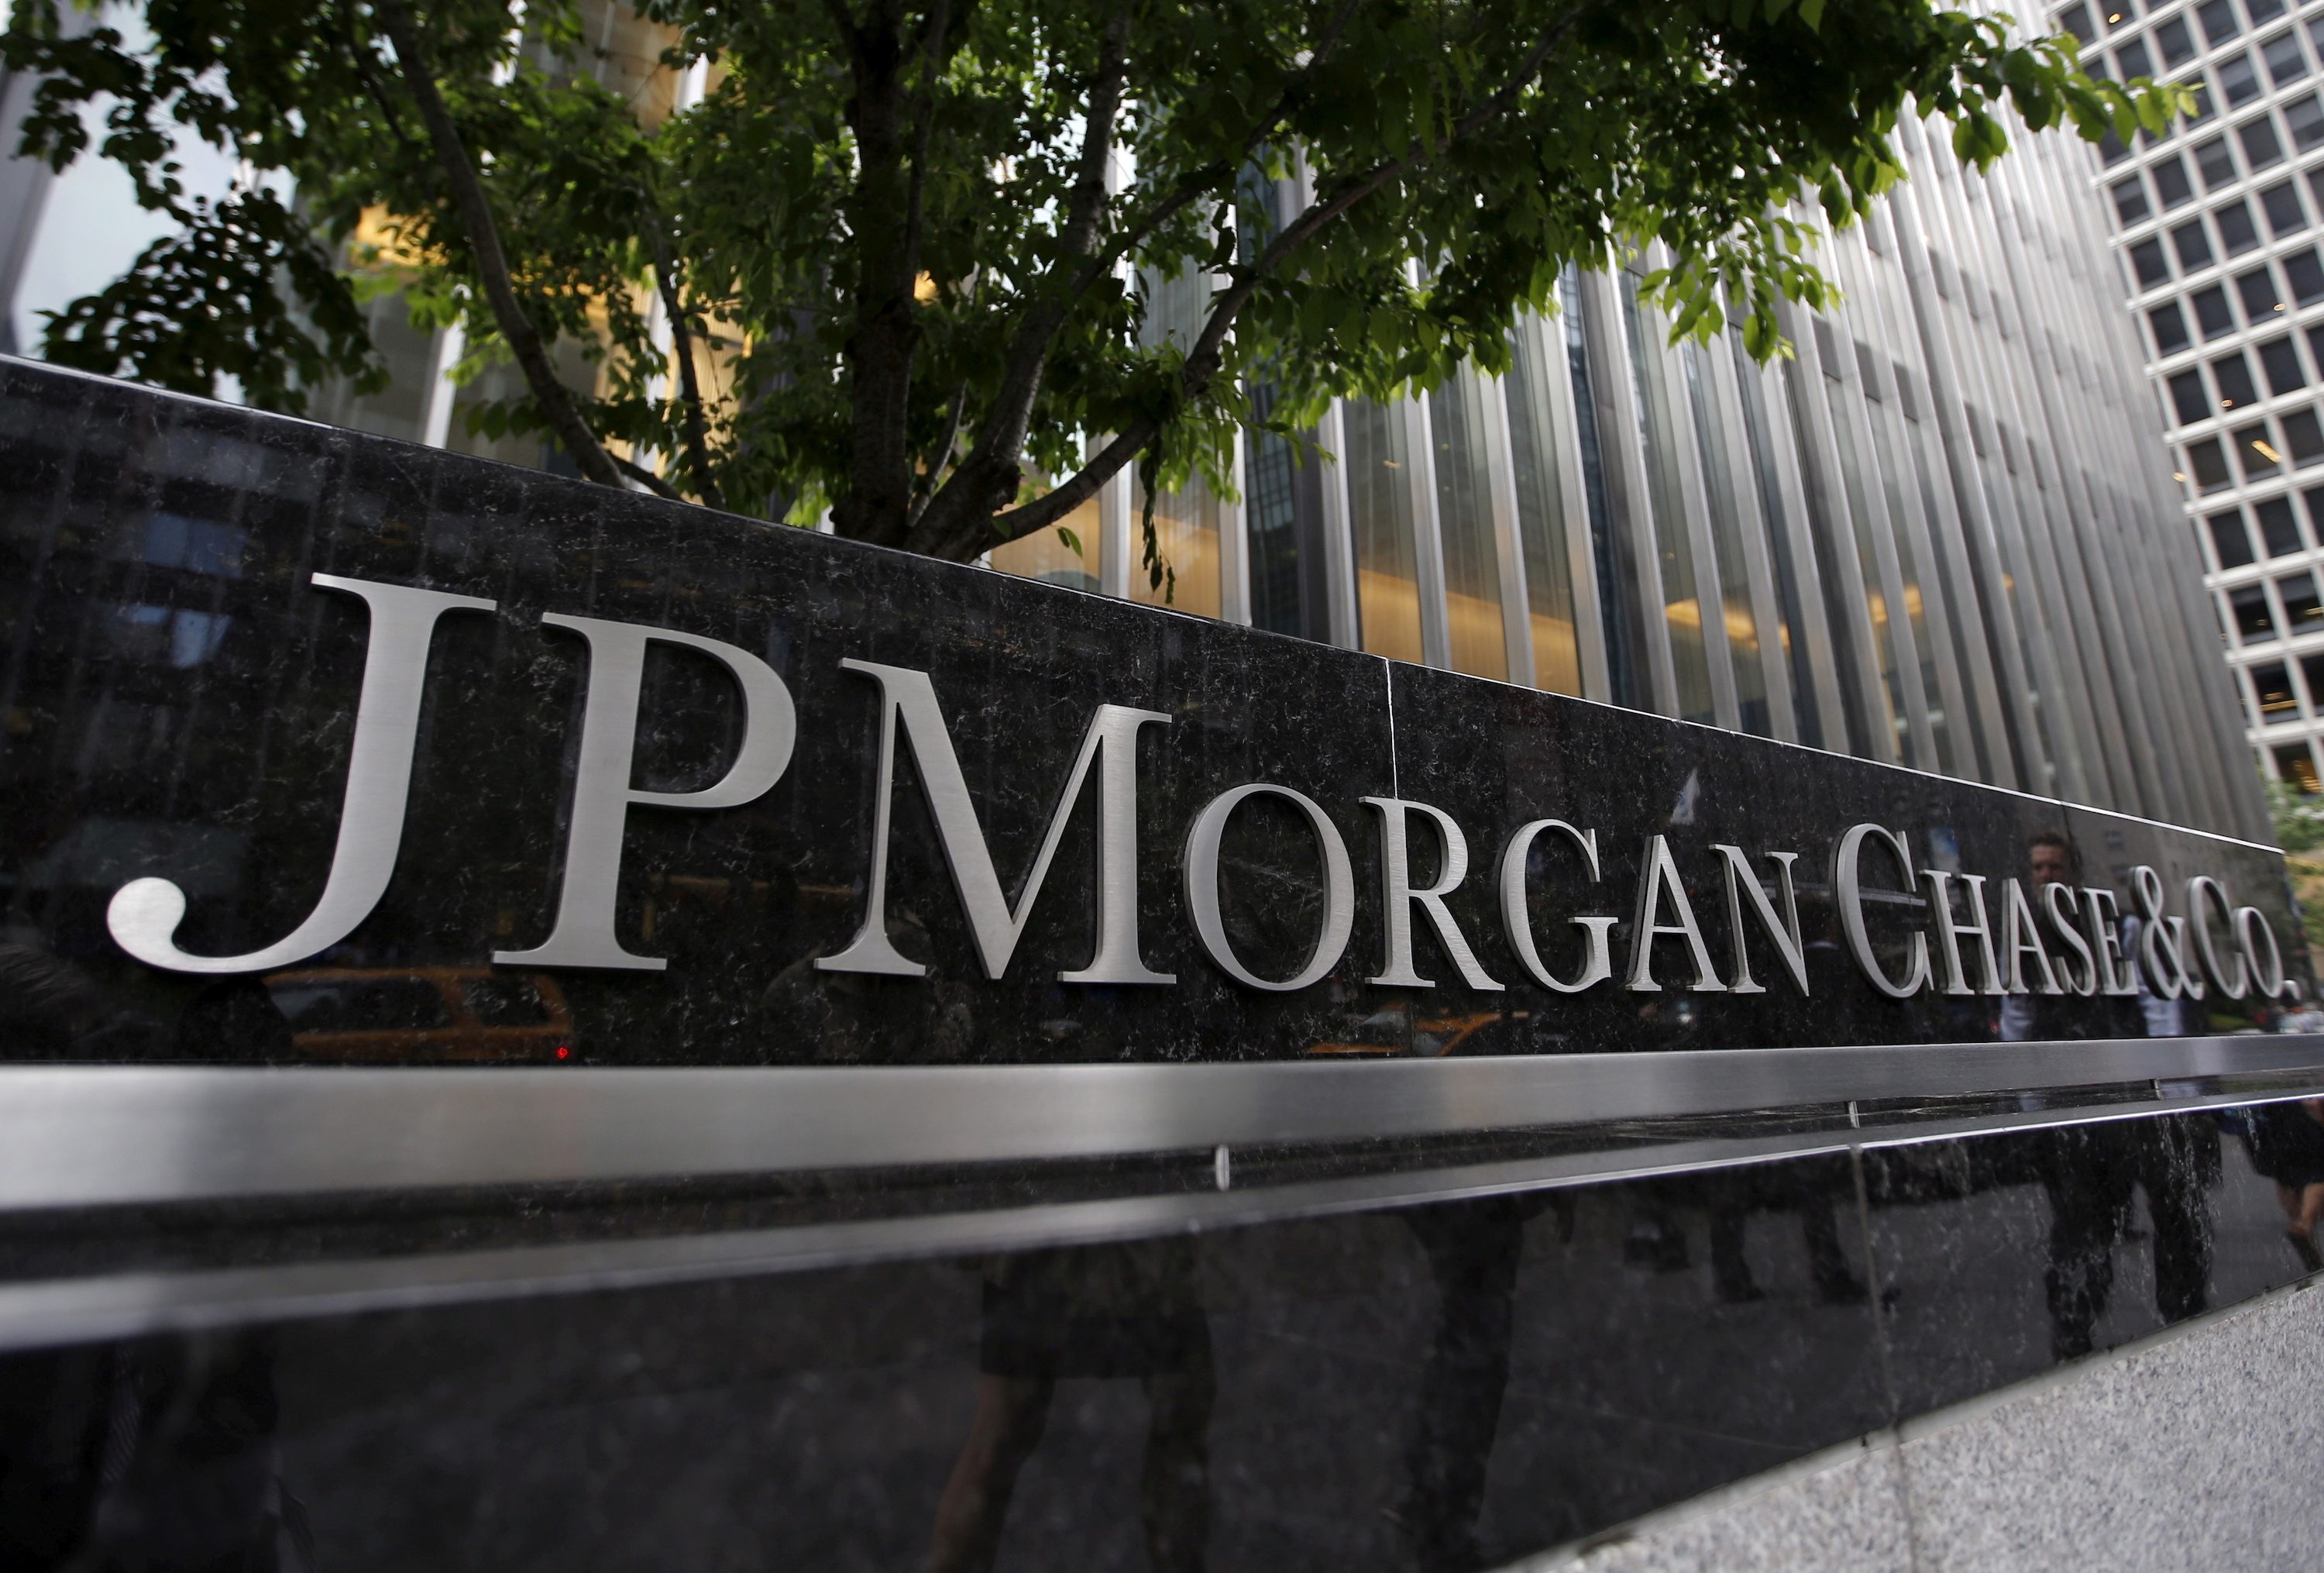 JPMorgan can sue former executive Staley over Epstein ties – US judge